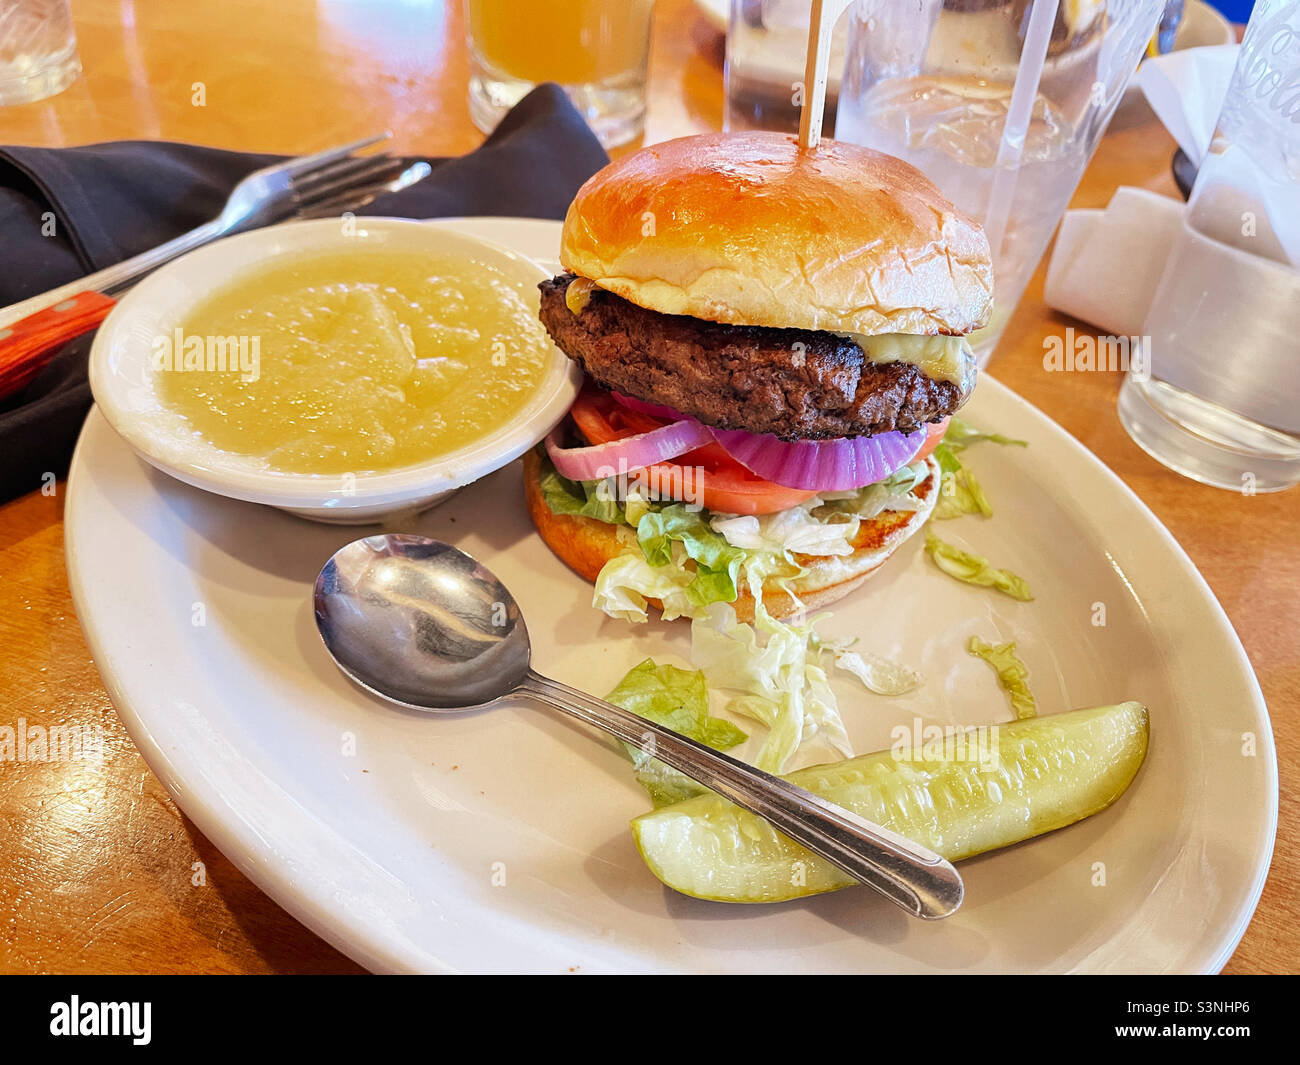 Chargrilled hamburger with all the fixings served with a pickle and applesauce. Stock Photo